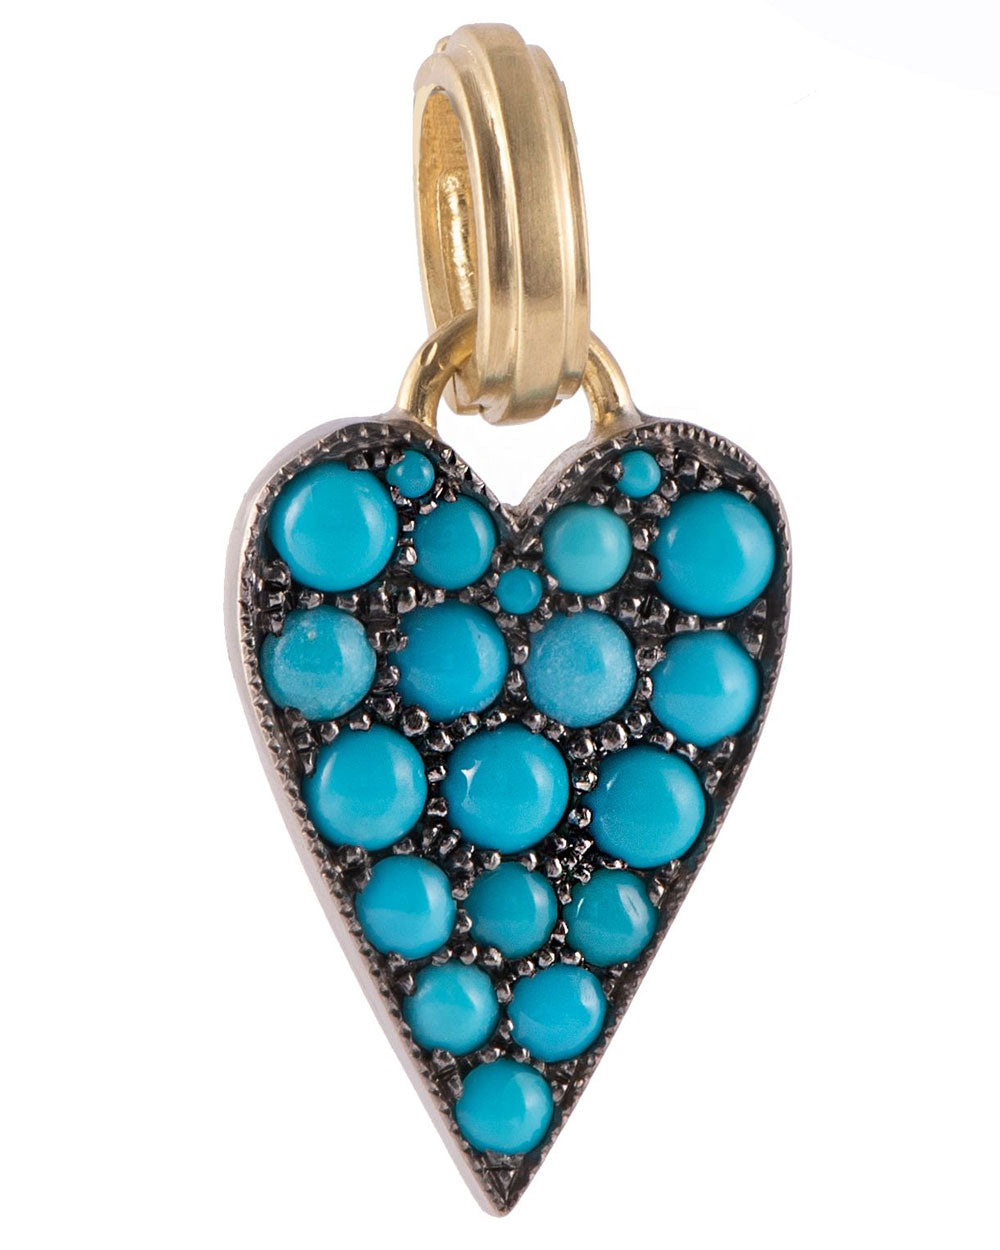 Small Turquoise Heart Pendant